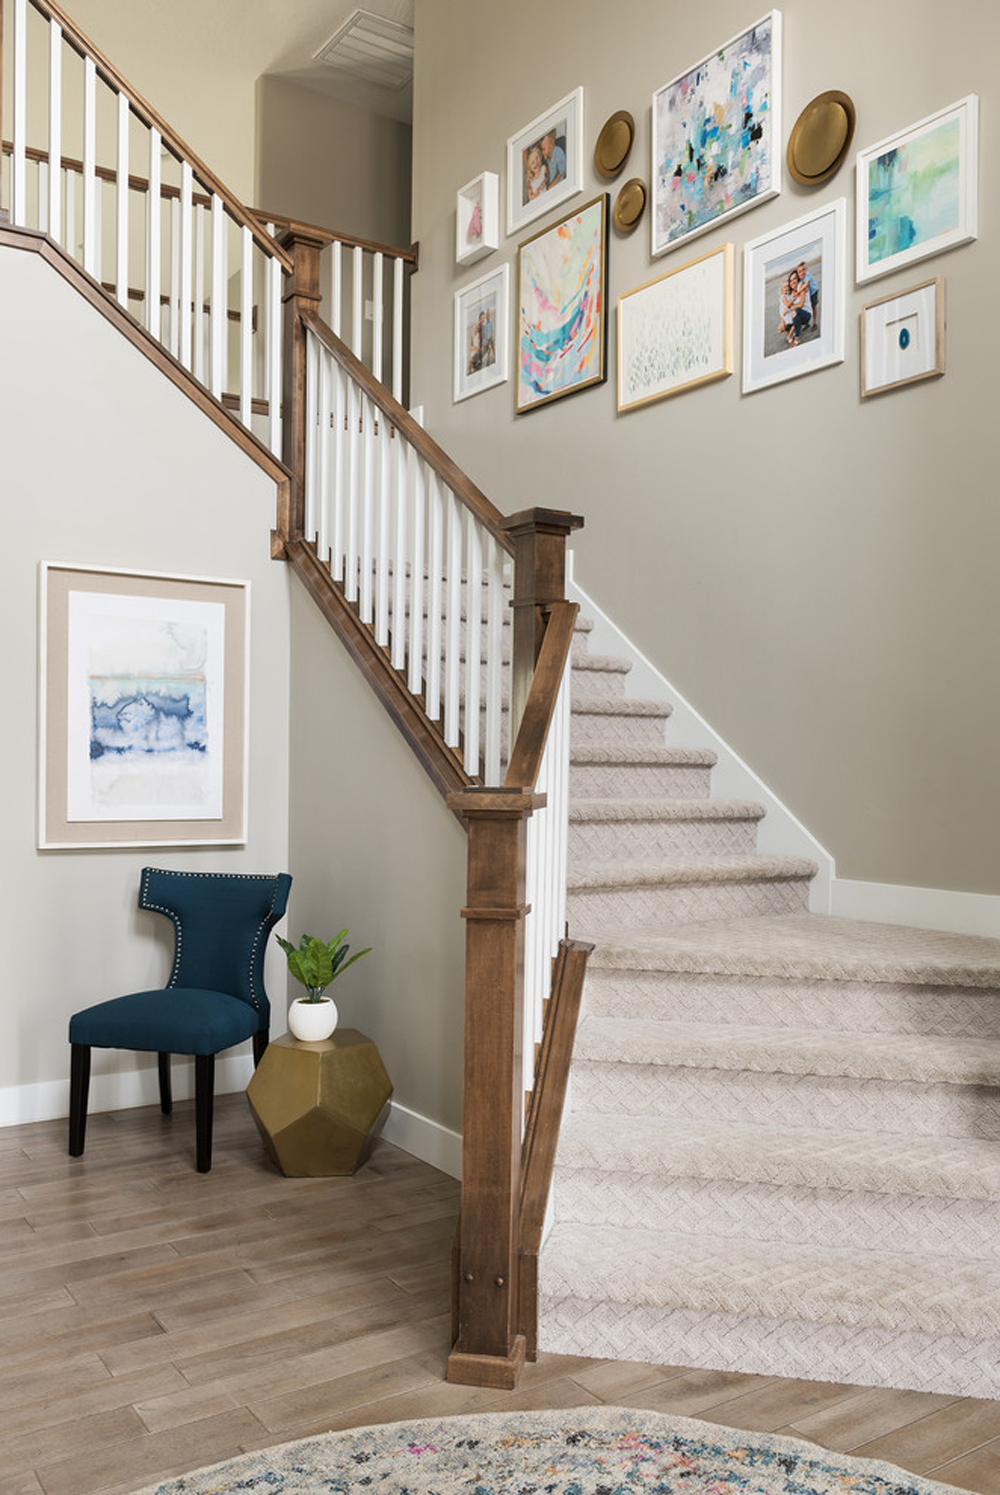 The carpet for stairs and how to pick the best one out there